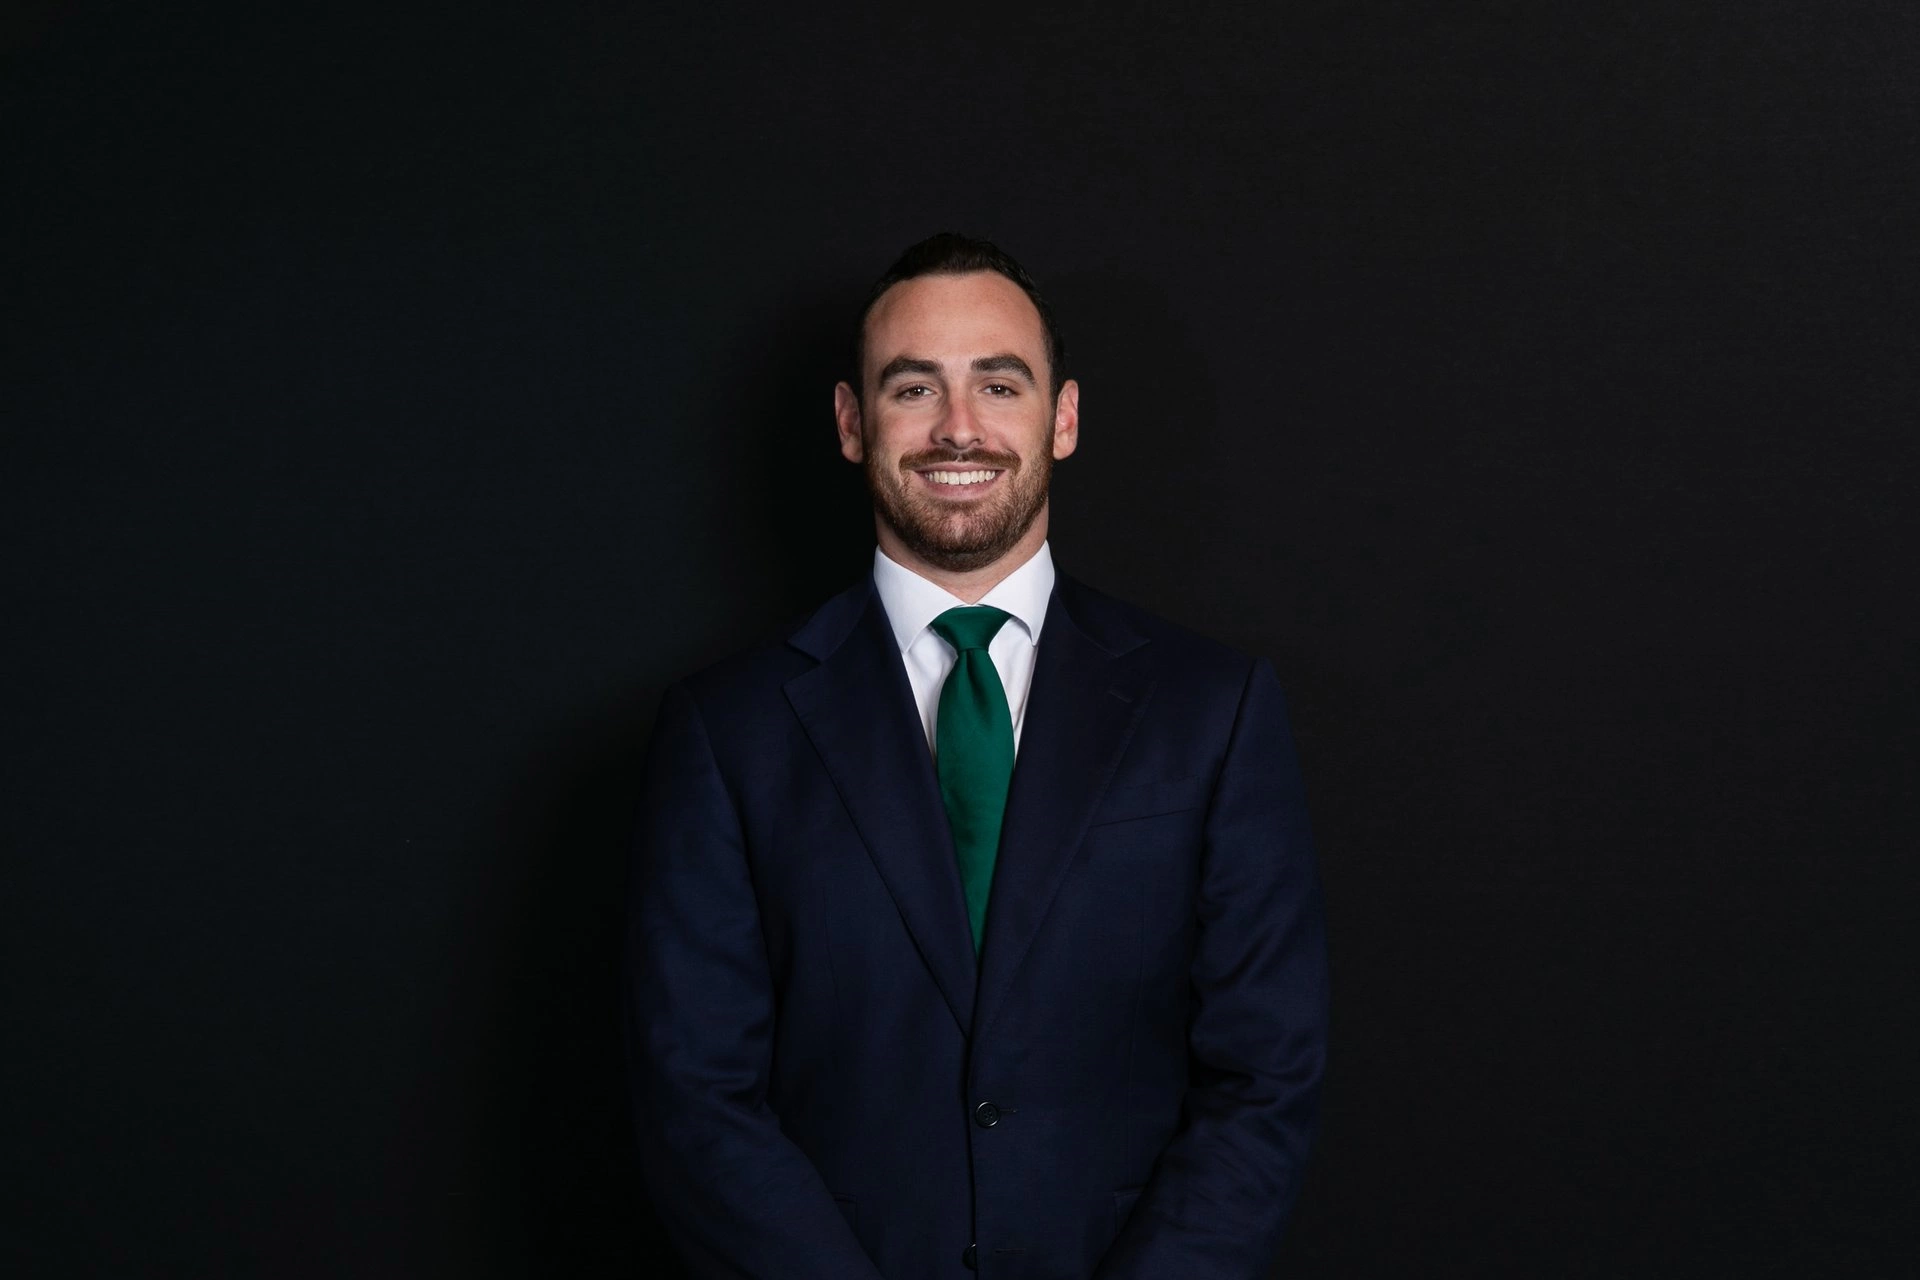 Kyle Cameron Real Estate Agent